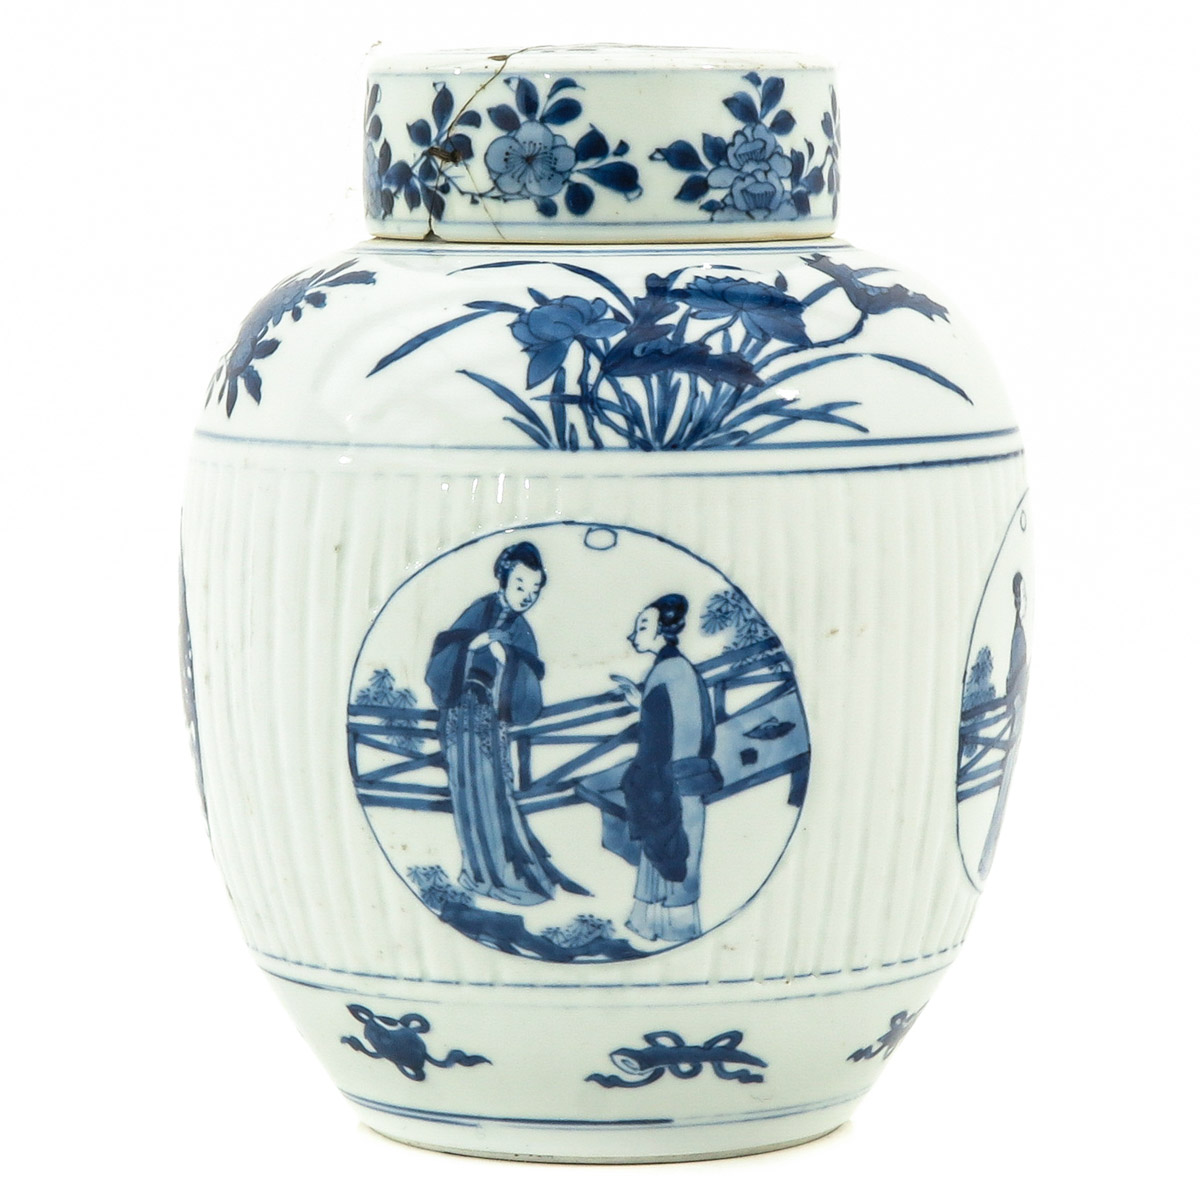 A Blue and White Ginger Jar - Image 3 of 10